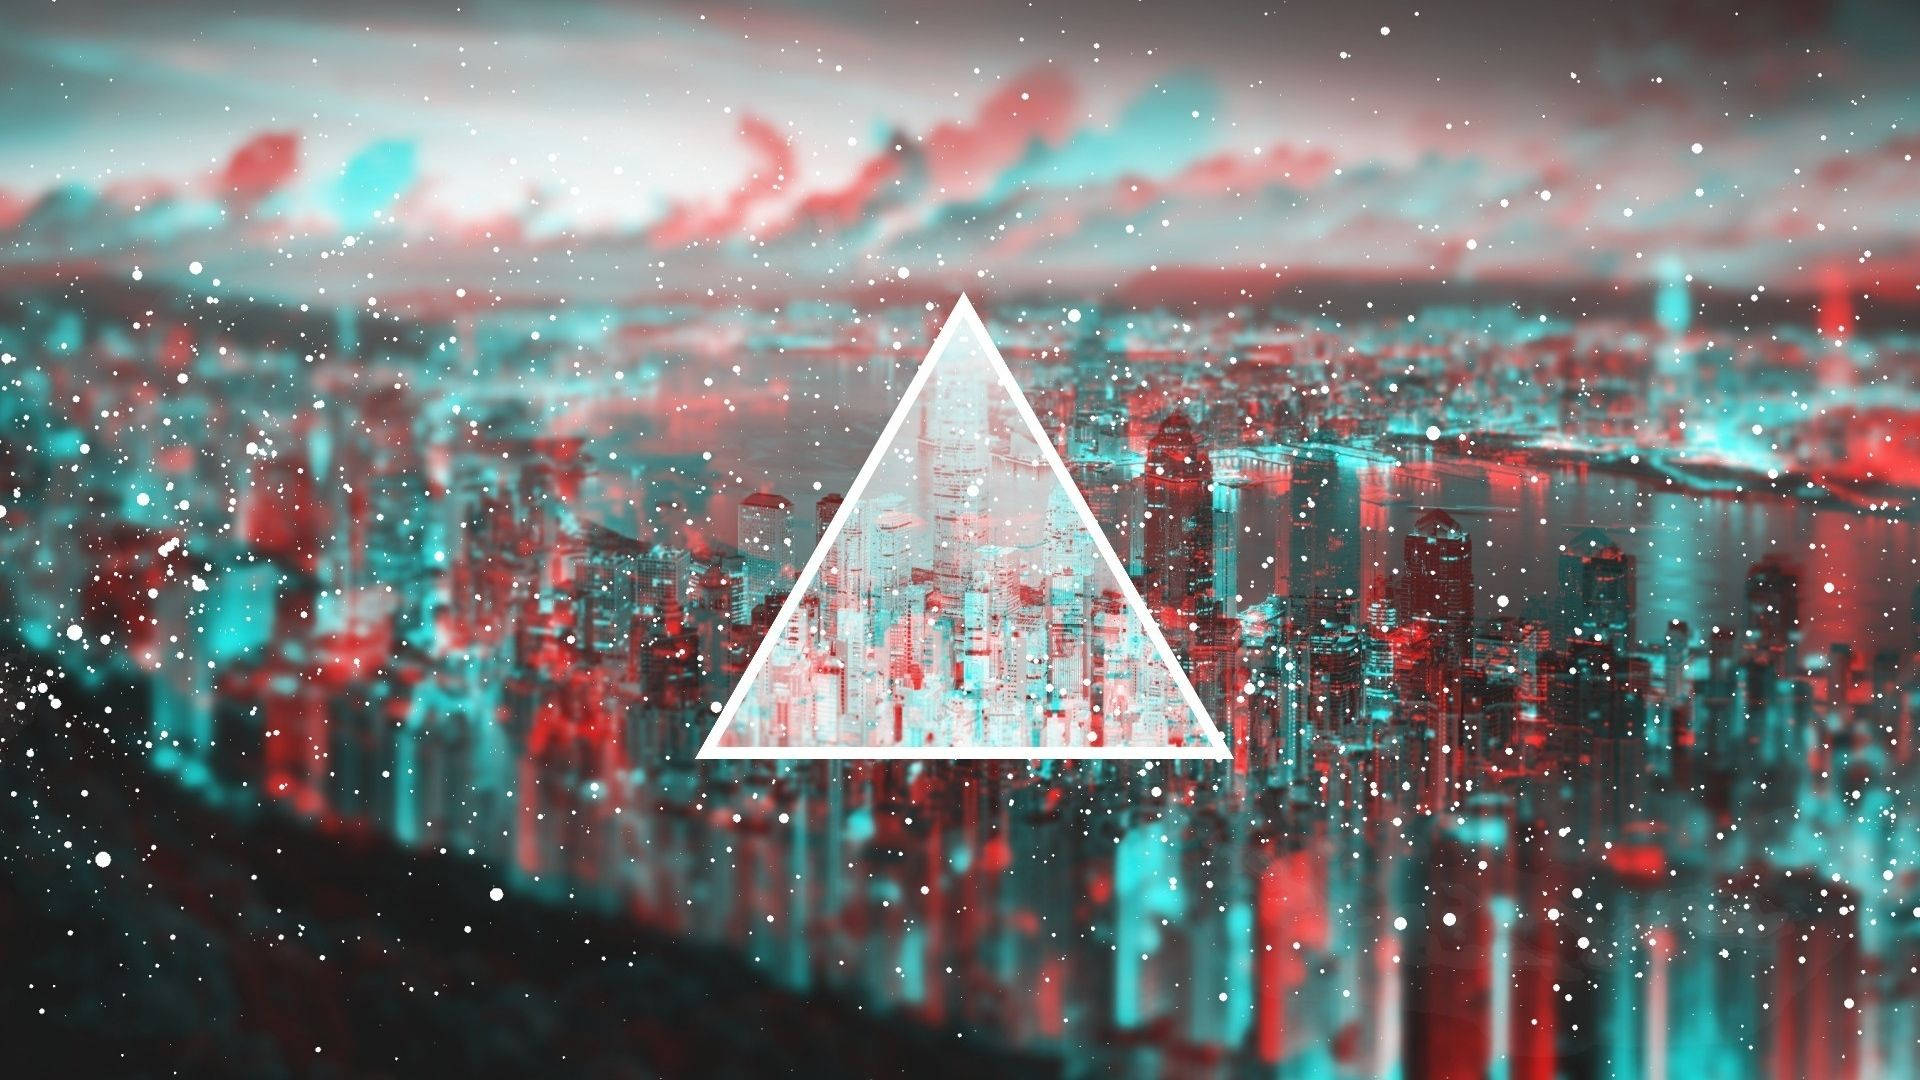 Hd Triangle And Glitch Abstract Art